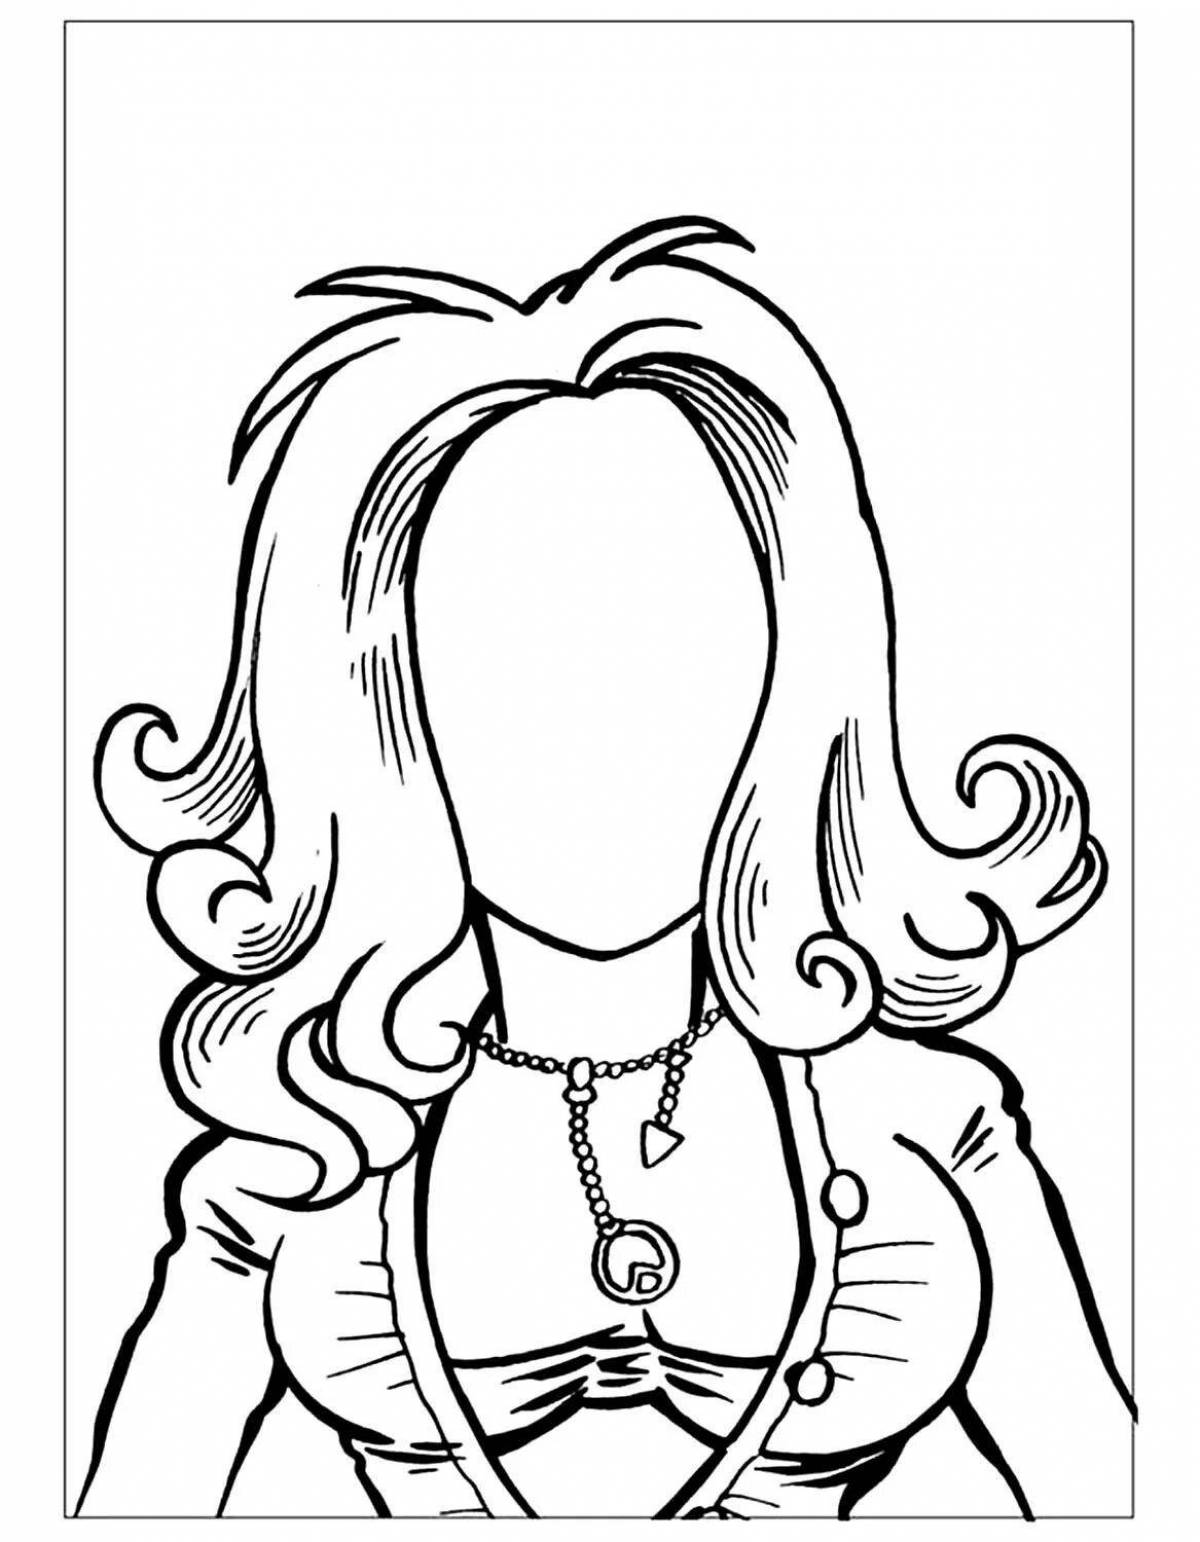 Smiling face coloring page